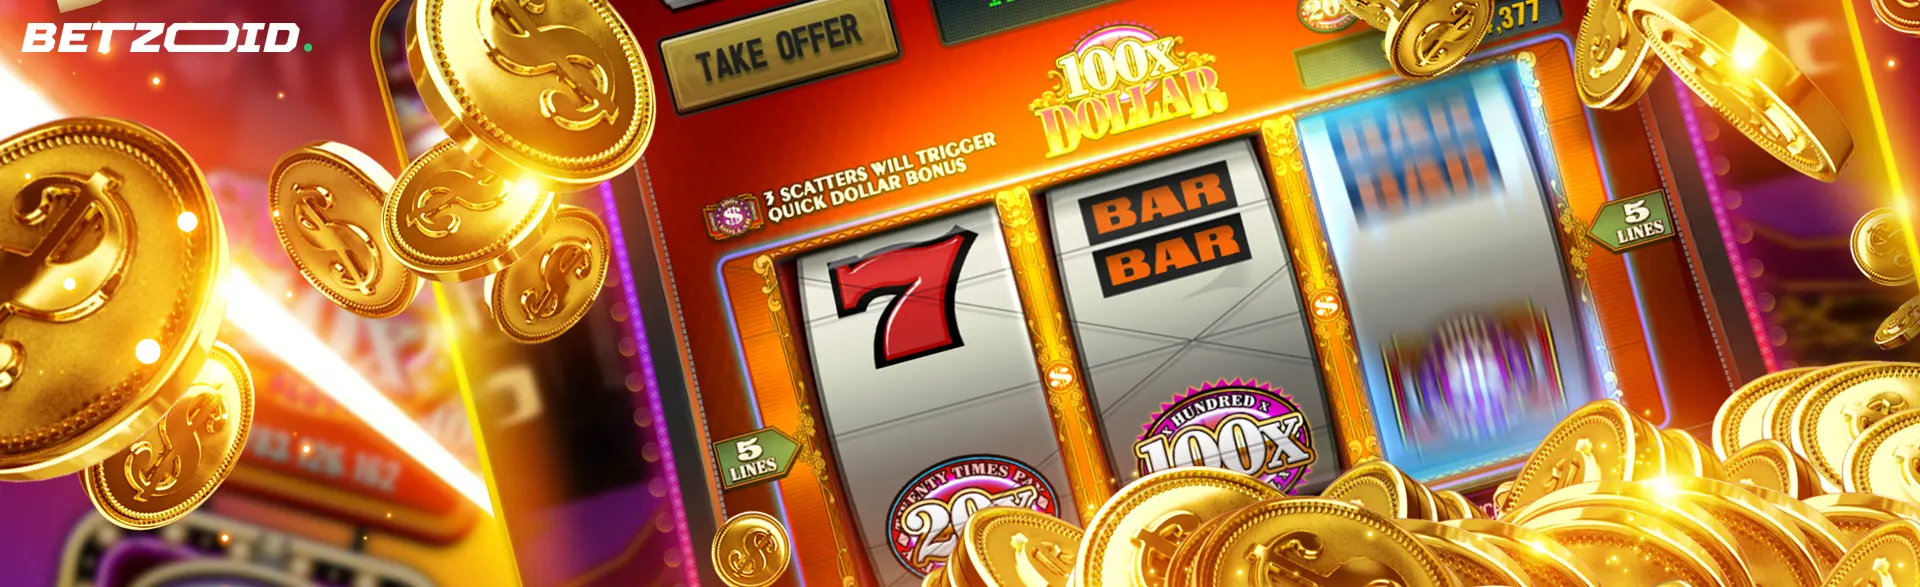 Luminous slot machine reels spinning with a flurry of golden coins, perfectly capturing the thrill of no deposit, no wager free spins at casinos in Canada.